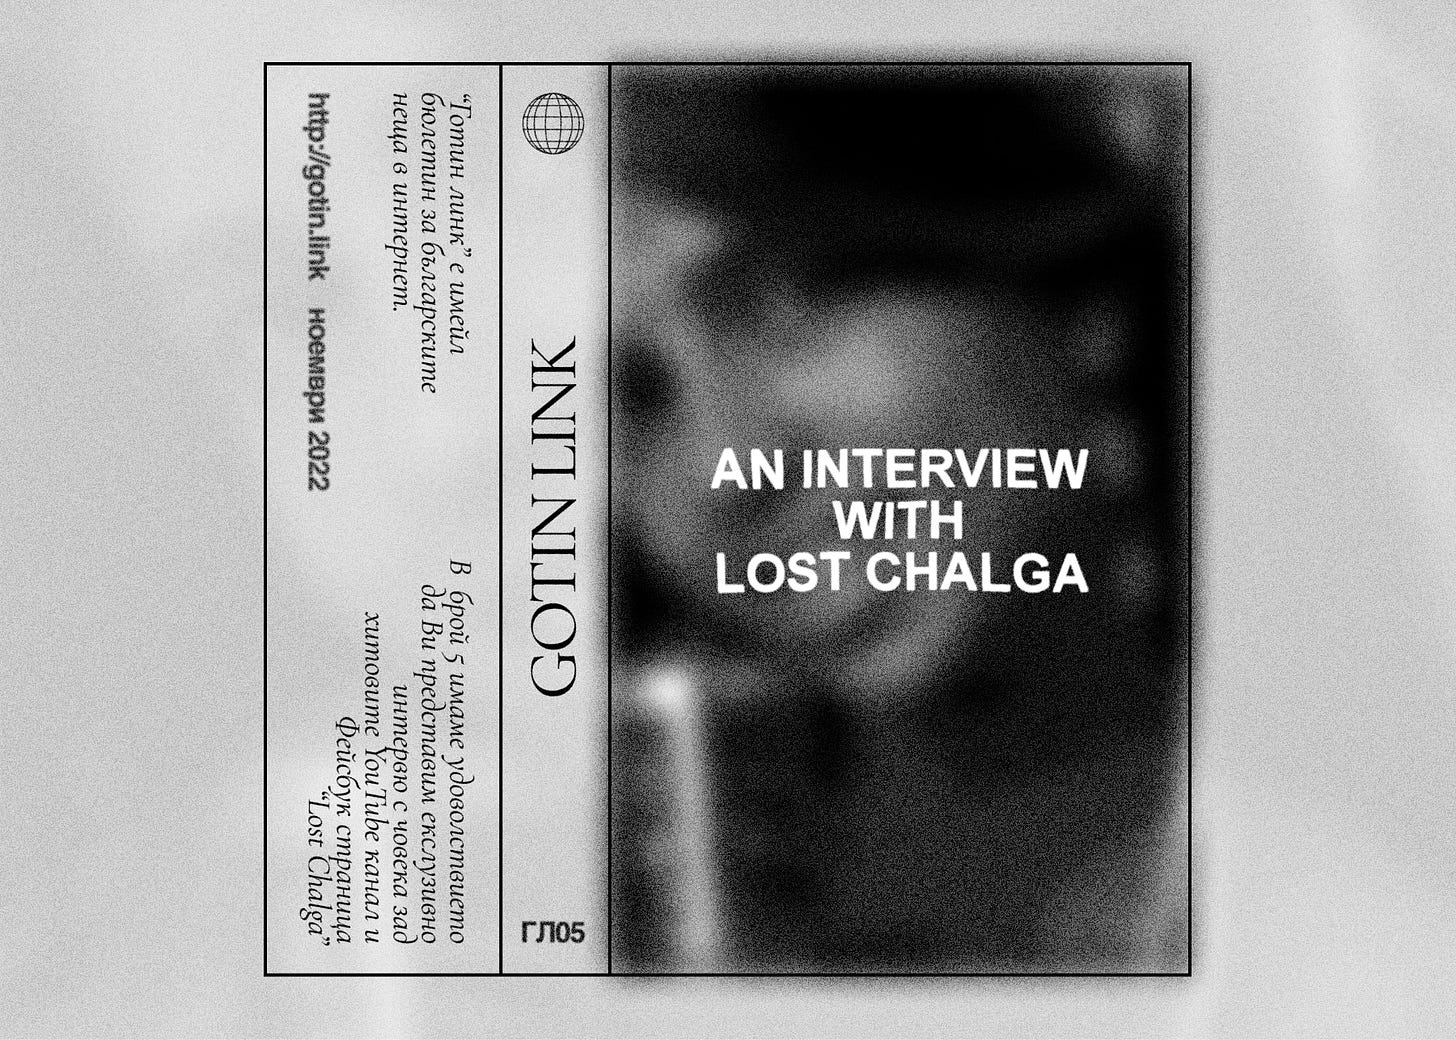 A j-card style graphic reading: "Gotin Link: An Interview with Lost Chalga"